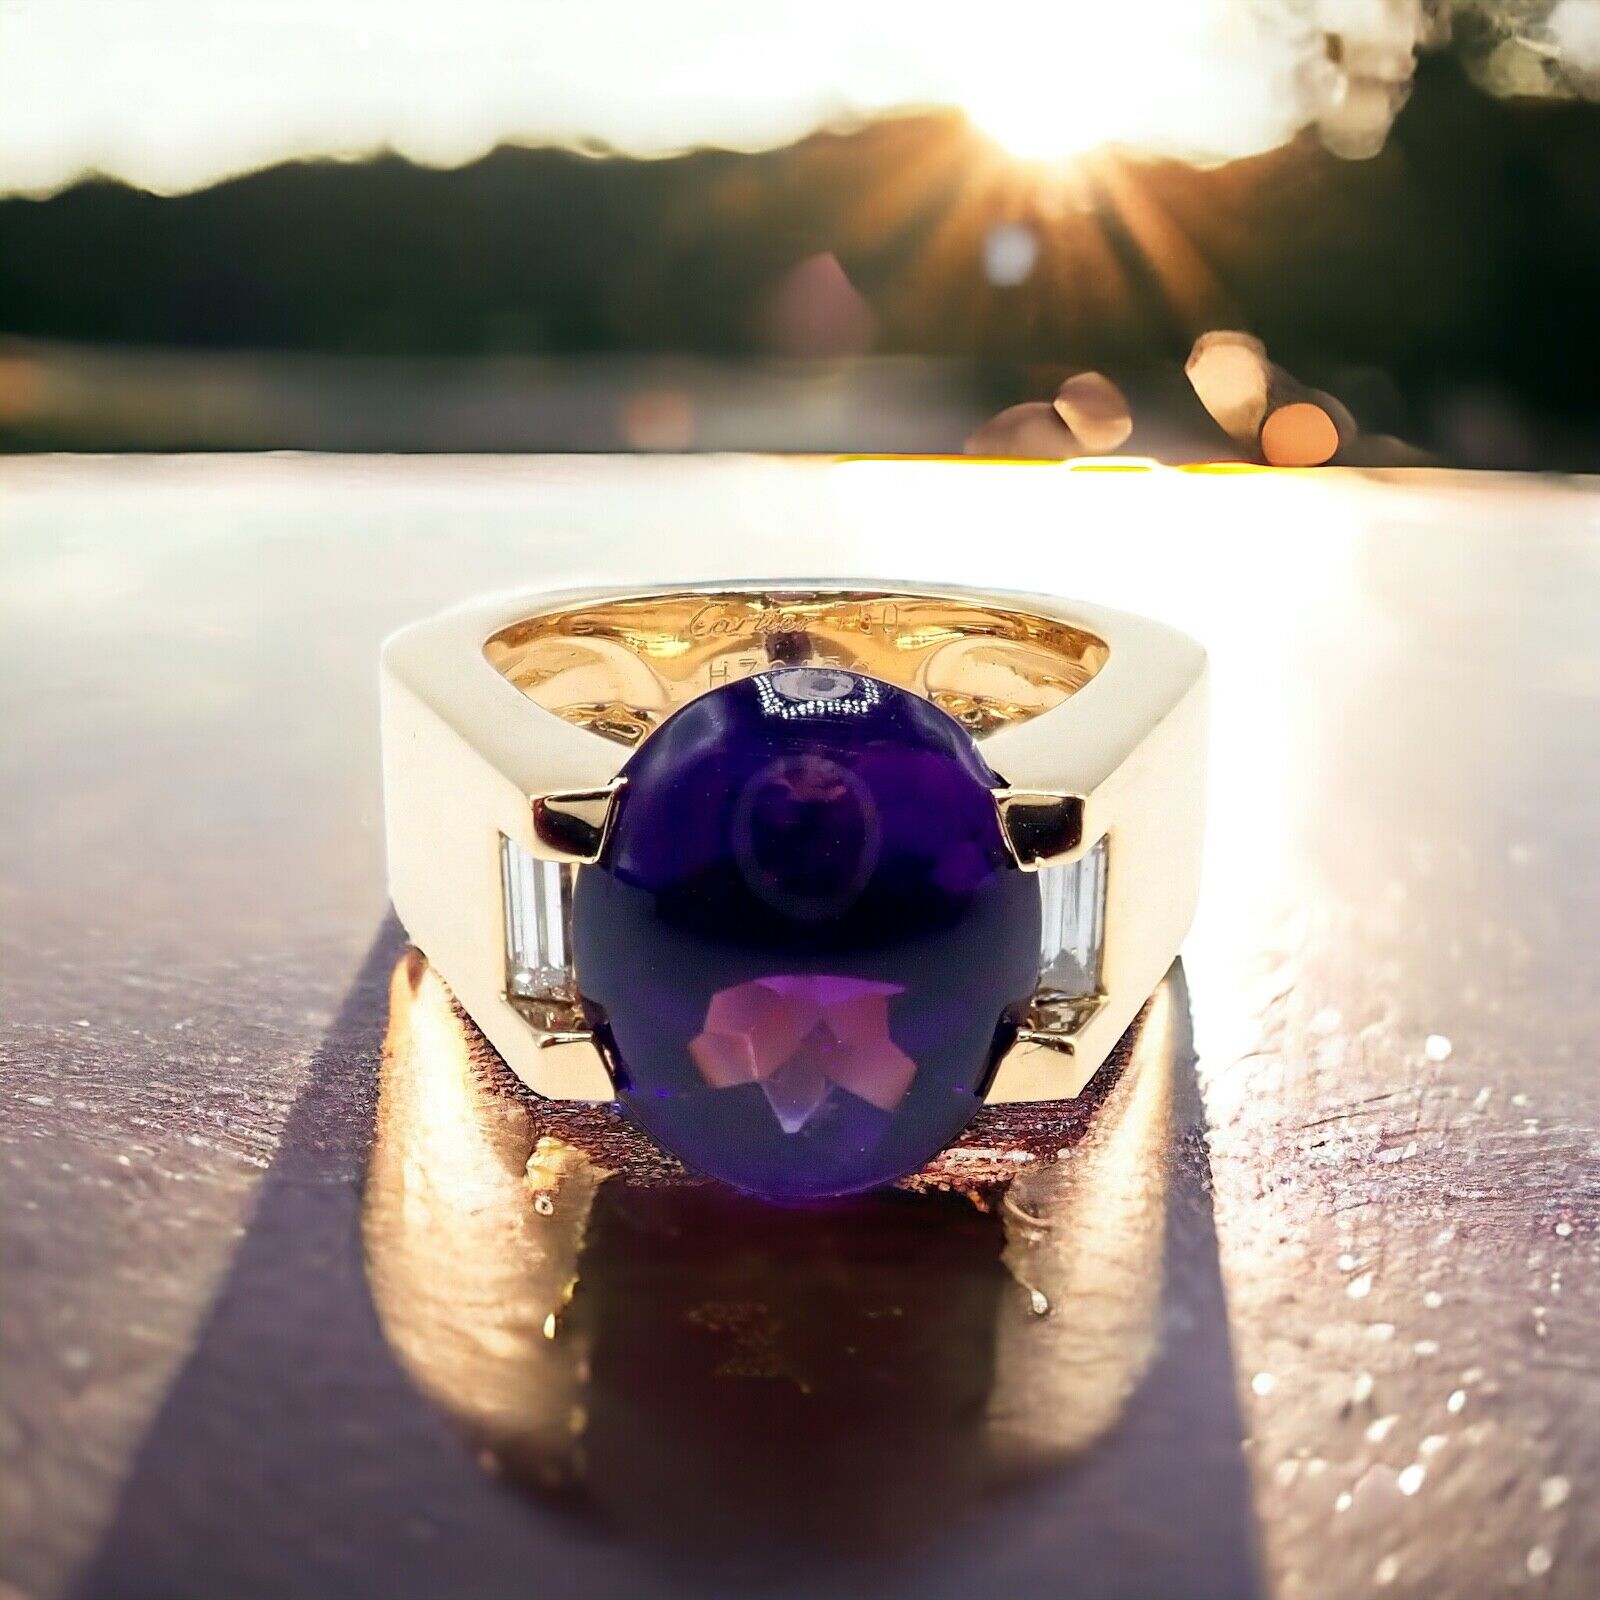 Authentic! Cartier Tankissi 18k Yellow Gold Diamond Large Amethyst Ring | Fortrove